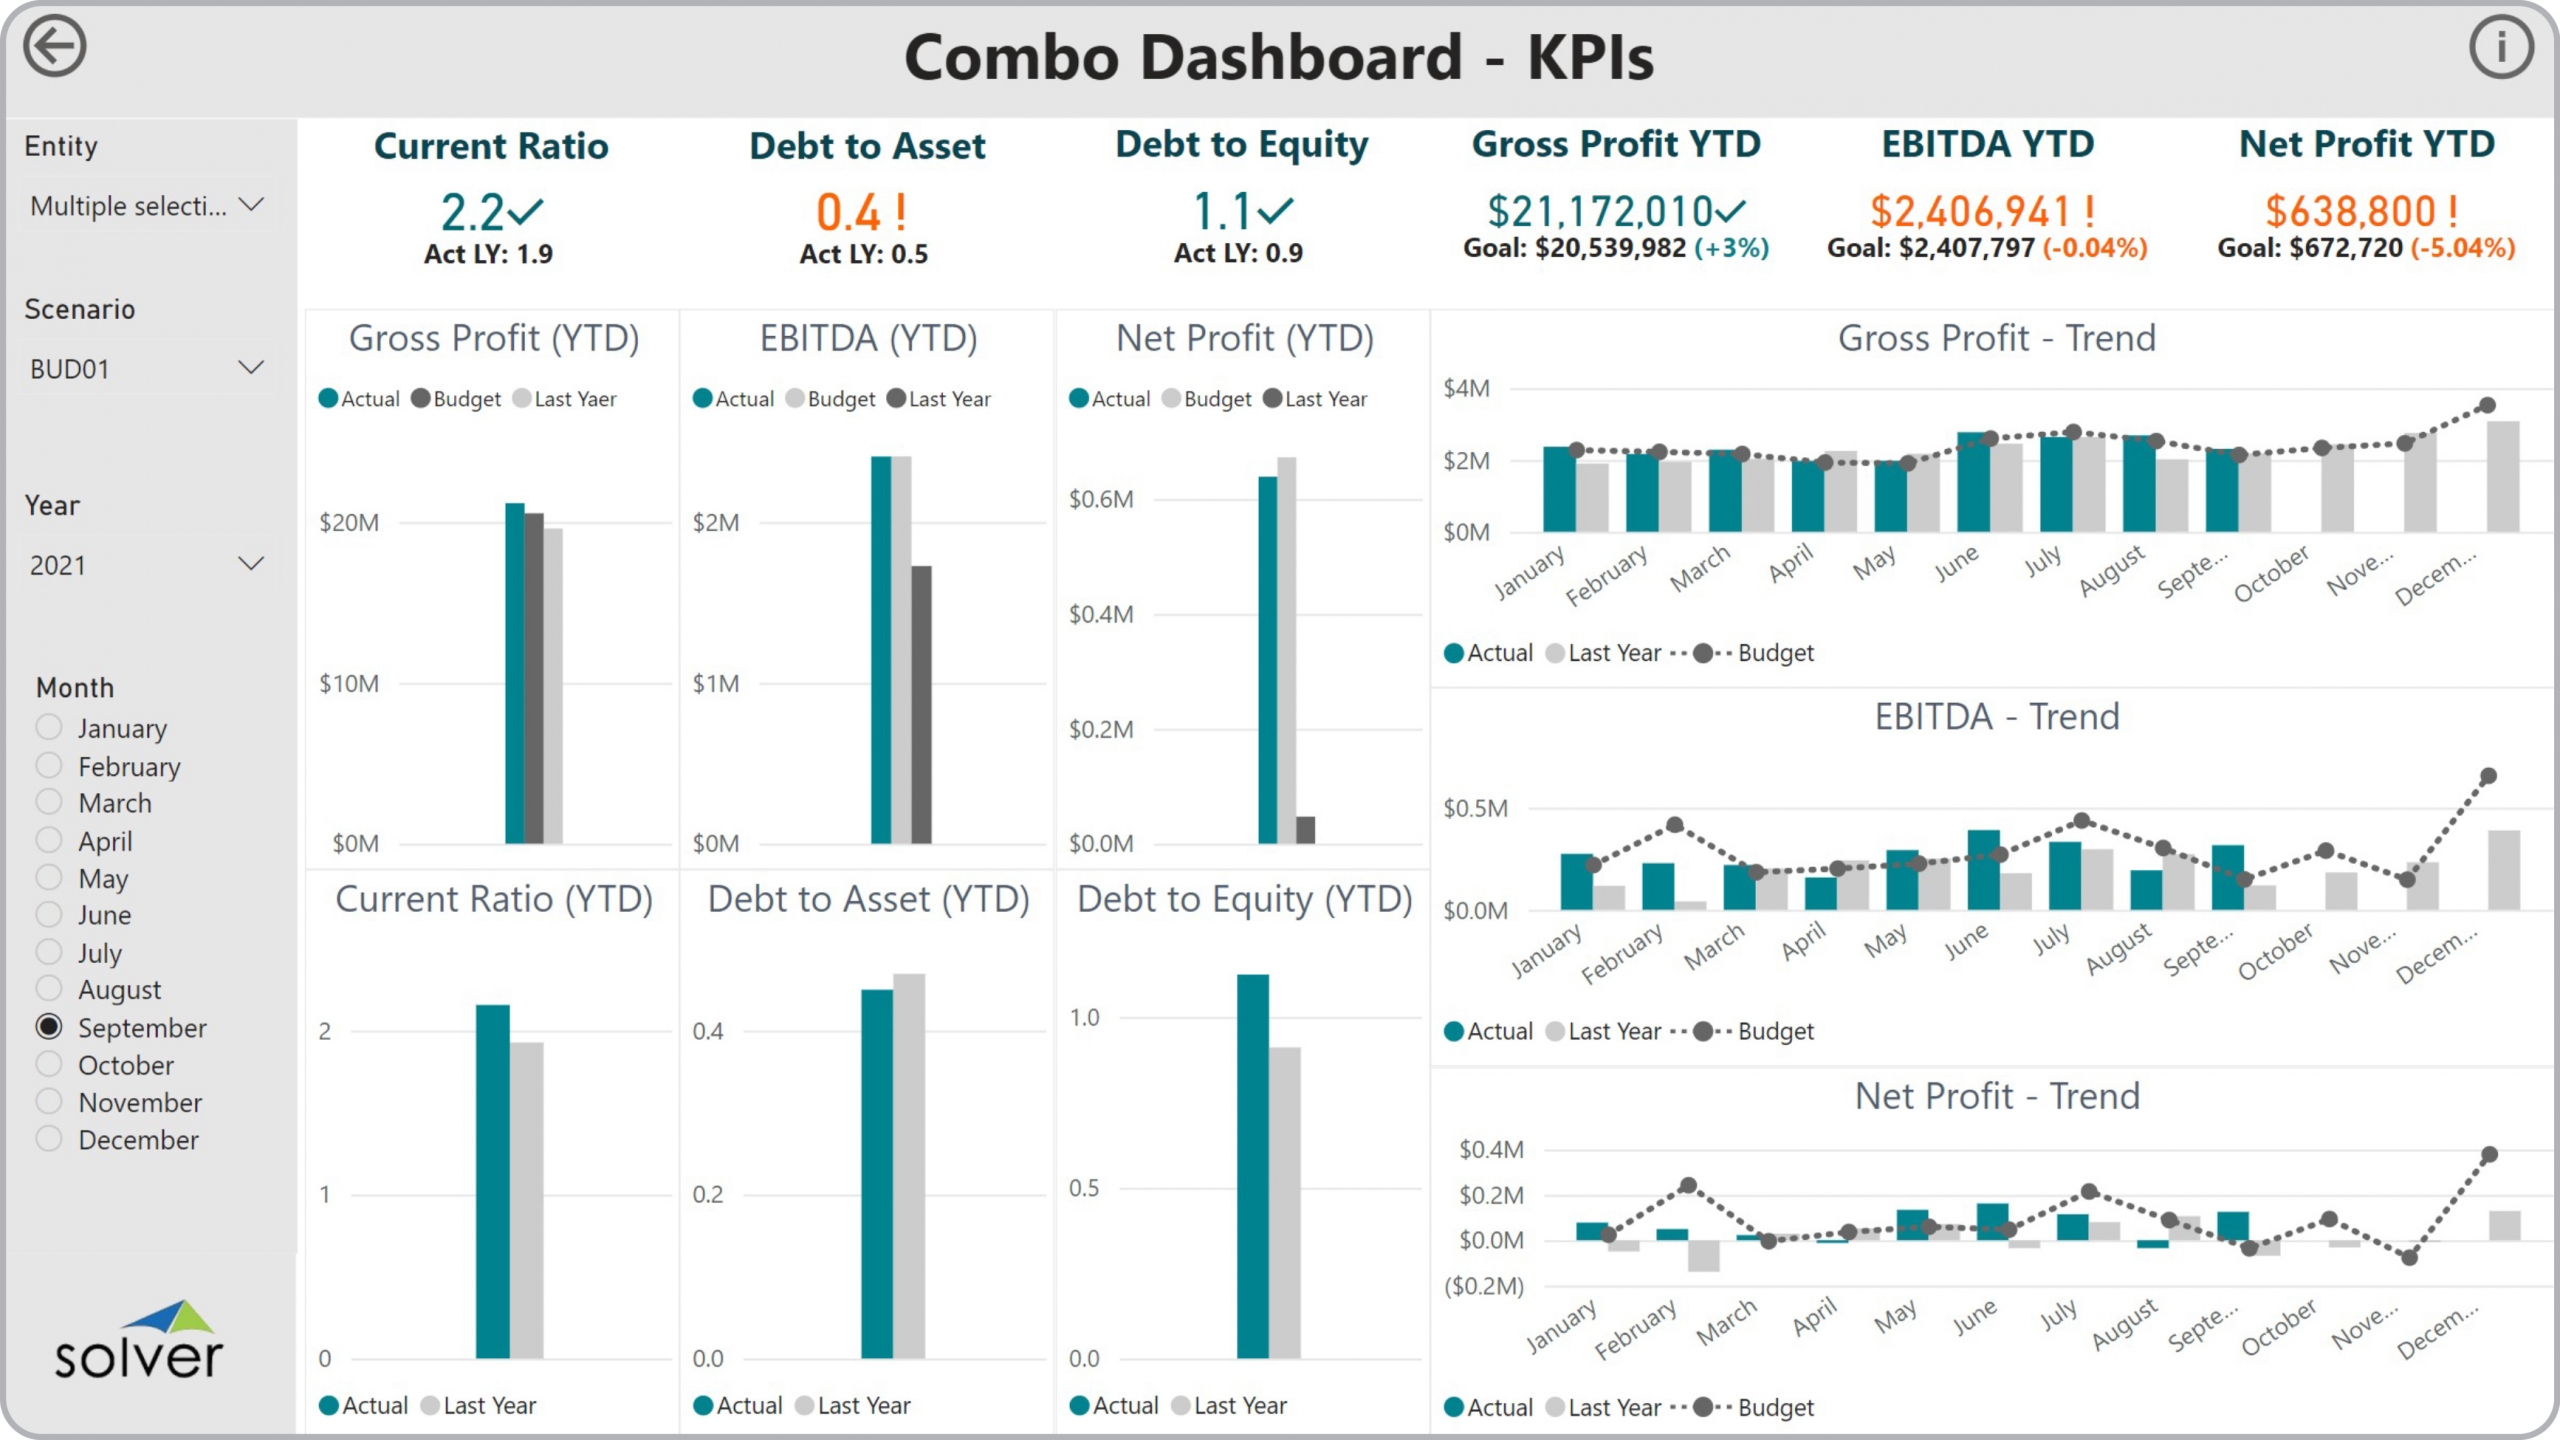 Example of a KPI Dashboard with Trends and Variances to Streamline the Monthly Reporting Process